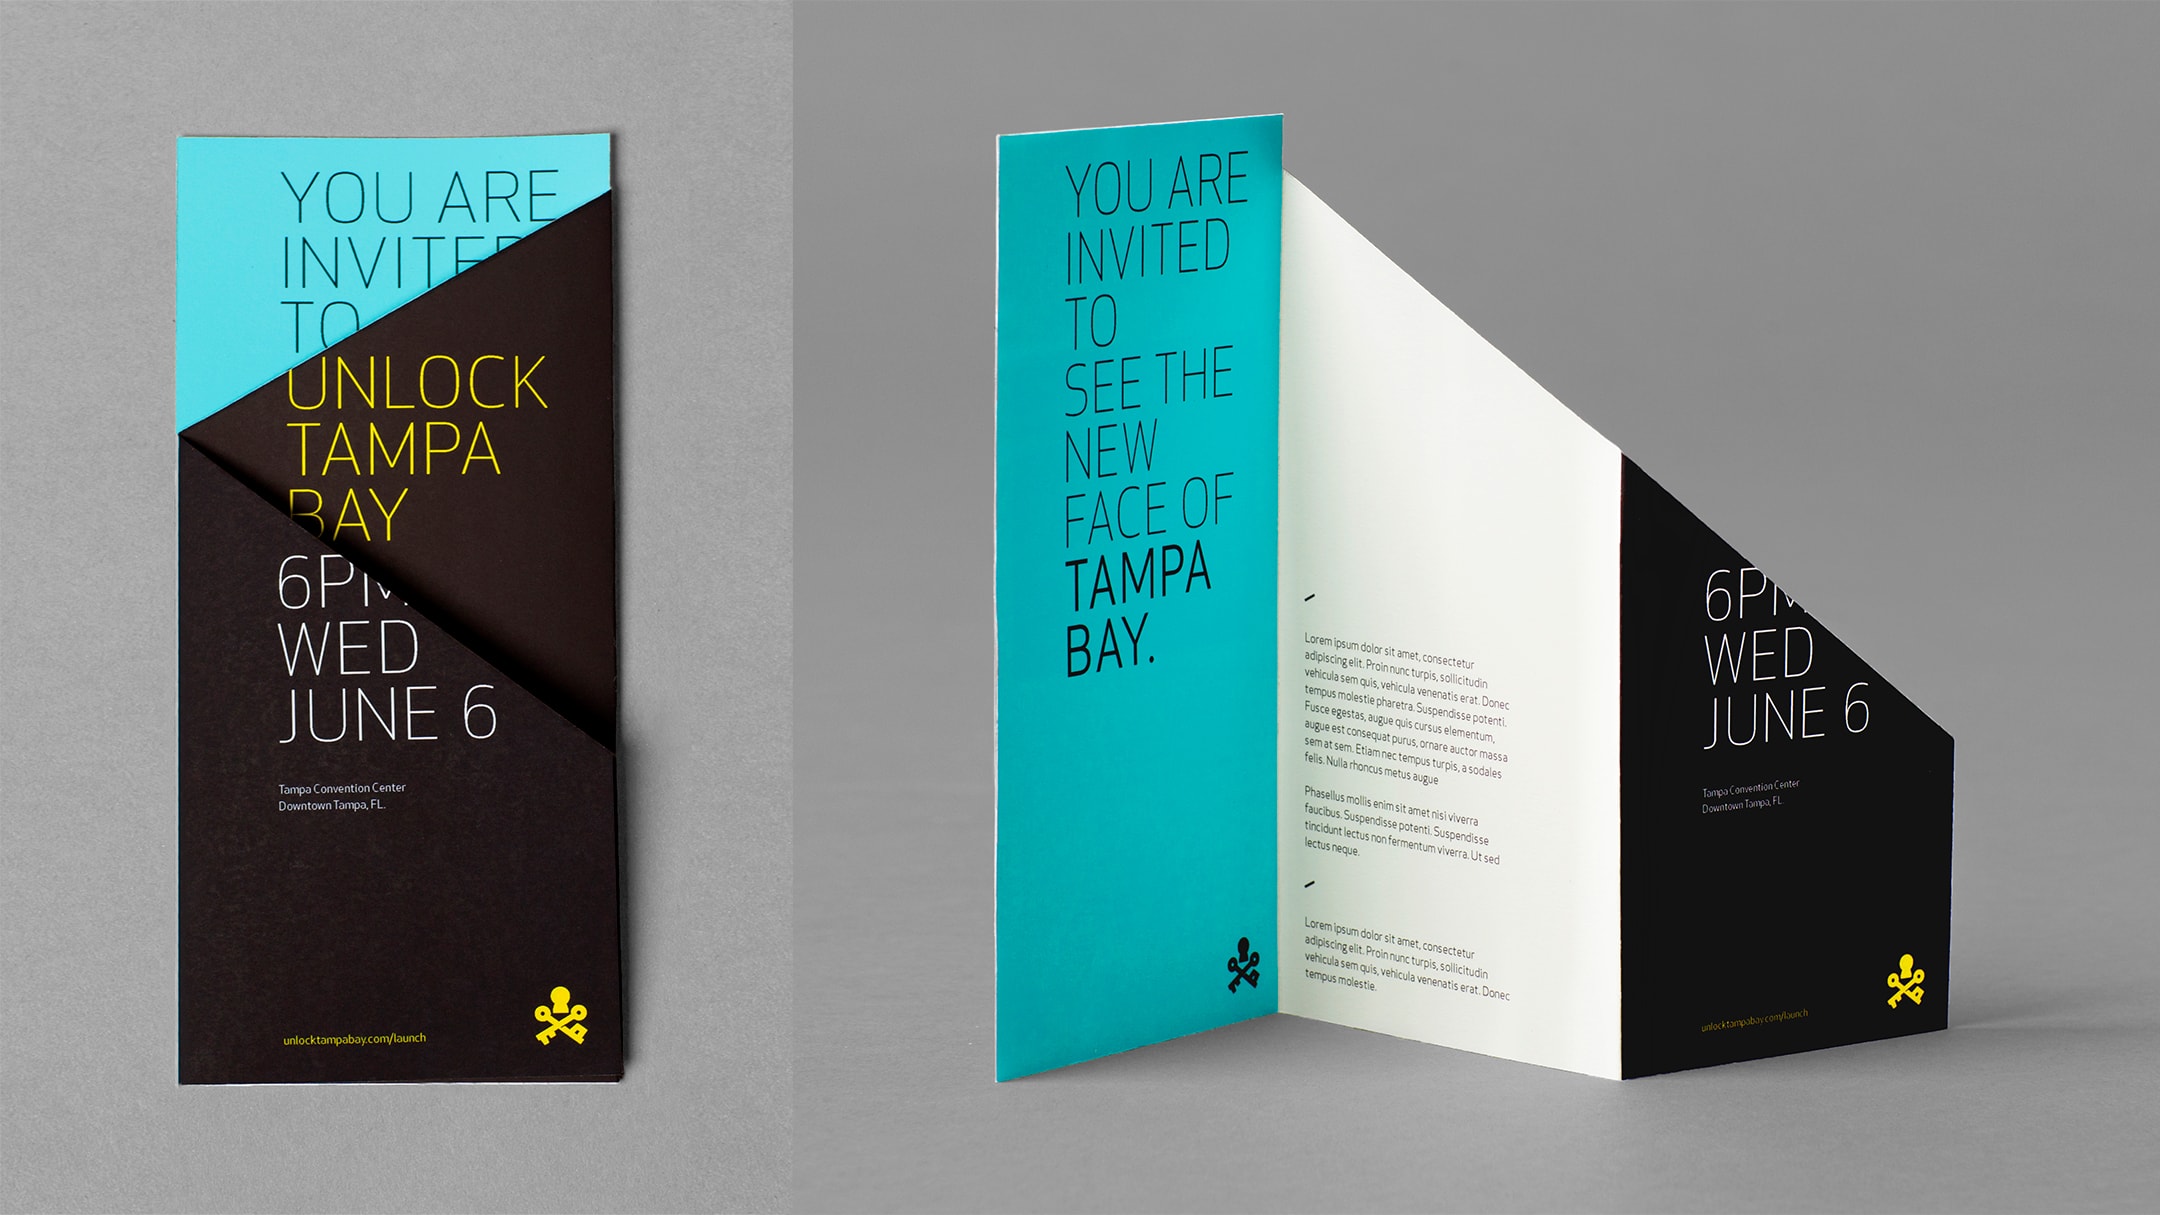 Visit Tampa Bay branded launch invitation - a portion of our destination marketing efforts